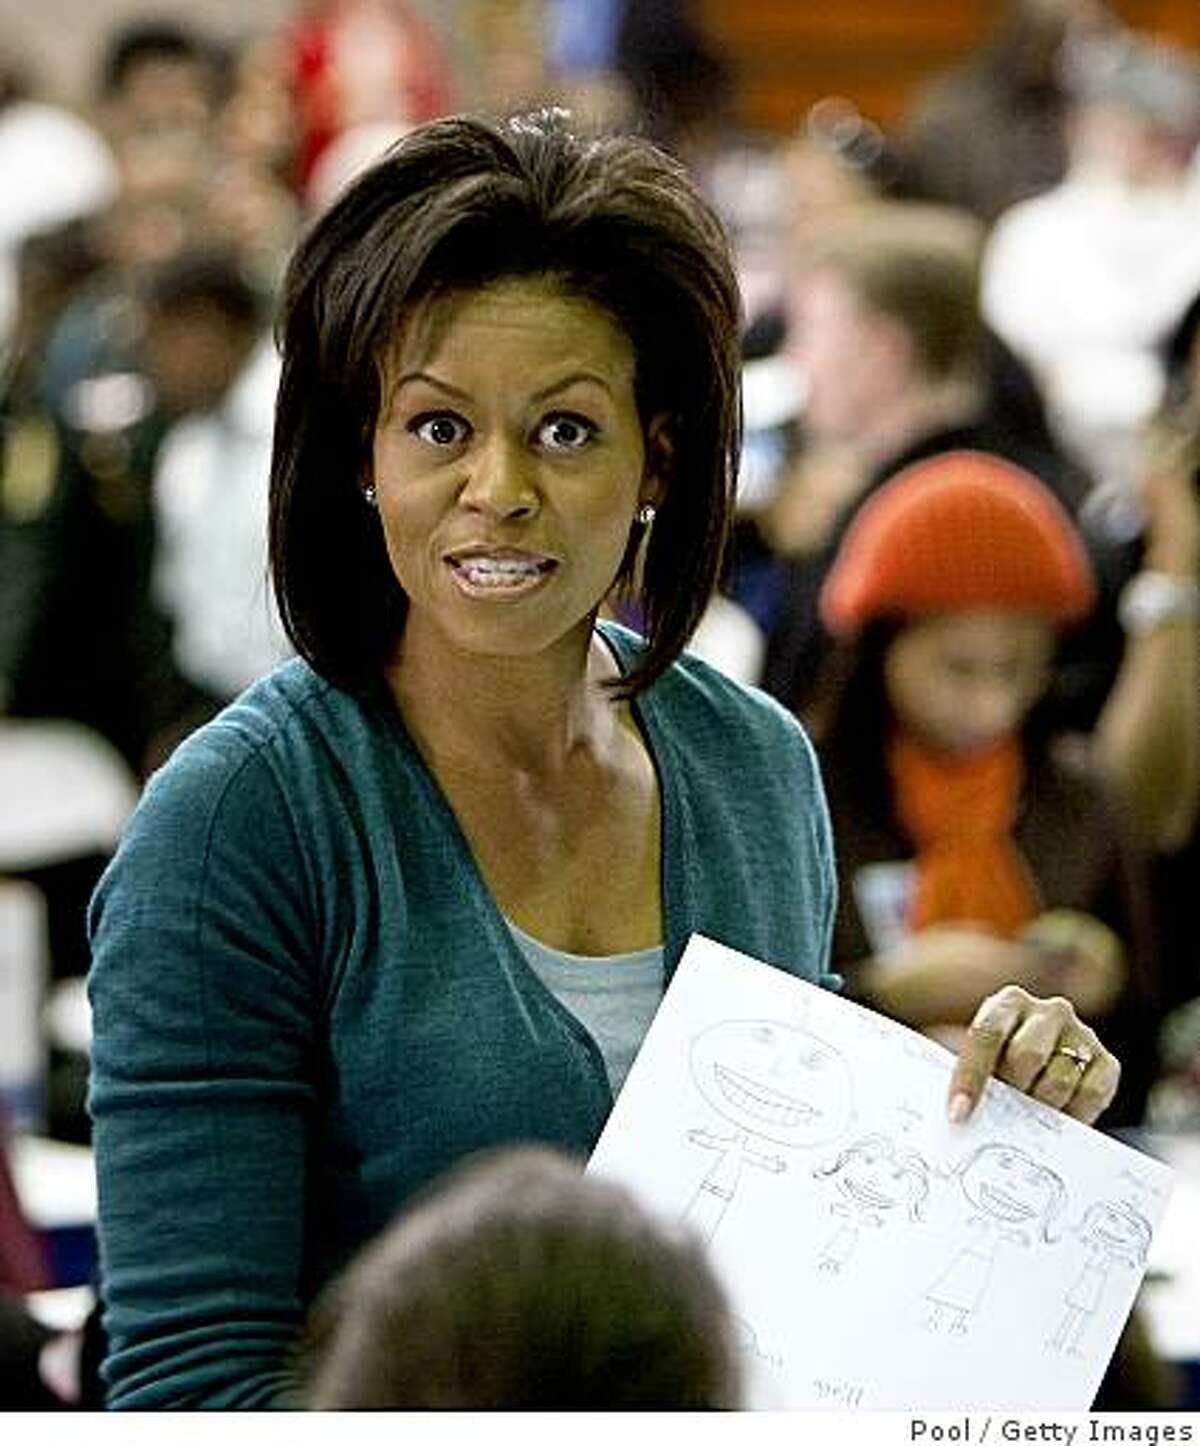 WASHINGTON - JANUARY 19: Michelle Obama holds a picture a young girl drew of her family at Calvin Coolidge High School where students, military families, and volunteer service groups are working on various projects supporting the troops on January 19, 2009 in Washington, DC. Obama stopped at Calvin Coolidge High School to promote his "Day of Service" program. (Photo by Joshua Roberts-Pool/Getty Images)